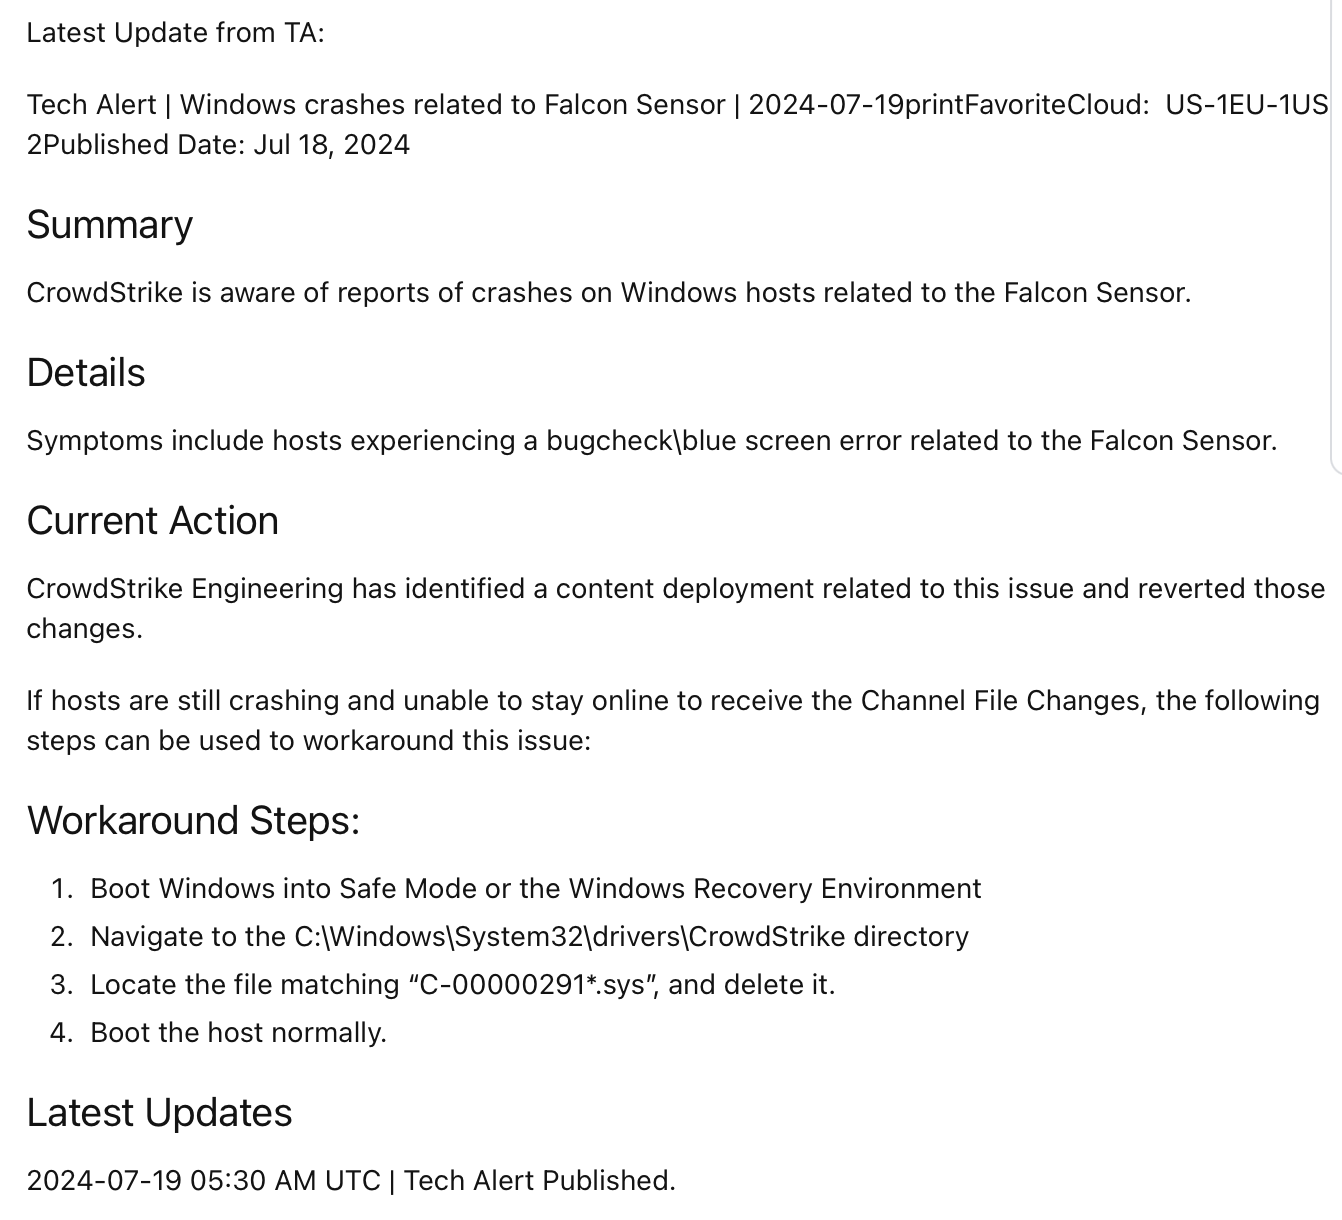 Latest Update from TA: Tech Alert | Windows crashes related to Falcon Sensor | 2024-07-19printFavoriteCloud: US-1EU-1US-2Published Date: Jul 18, 2024 Summary CrowdStrike is aware of reports of crashes on Windows hosts related to the Falcon Sensor. Details <br>Symptoms include hosts experiencing a bugcheck\blue screen error related to the Falcon Sensor. Current Action CrowdStrike Engineering has identified a content deployment related to this issue and reverted those changes. If hosts are still crashing and <br>unable to stay online to receive the Channel File Changes, the following steps can be used to workaround this issue: Workaround Steps: Boot Windows into Safe Mode or the Windows Recovery Environment Navigate to the C:\Windows\System32\drivers\CrowdStrike <br>directory Locate the file matching “C-00000291*.sys”, and delete it. Boot the host normally. Latest Updates 2024-07-19 05:30 AM UTC | Tech Alert Published.